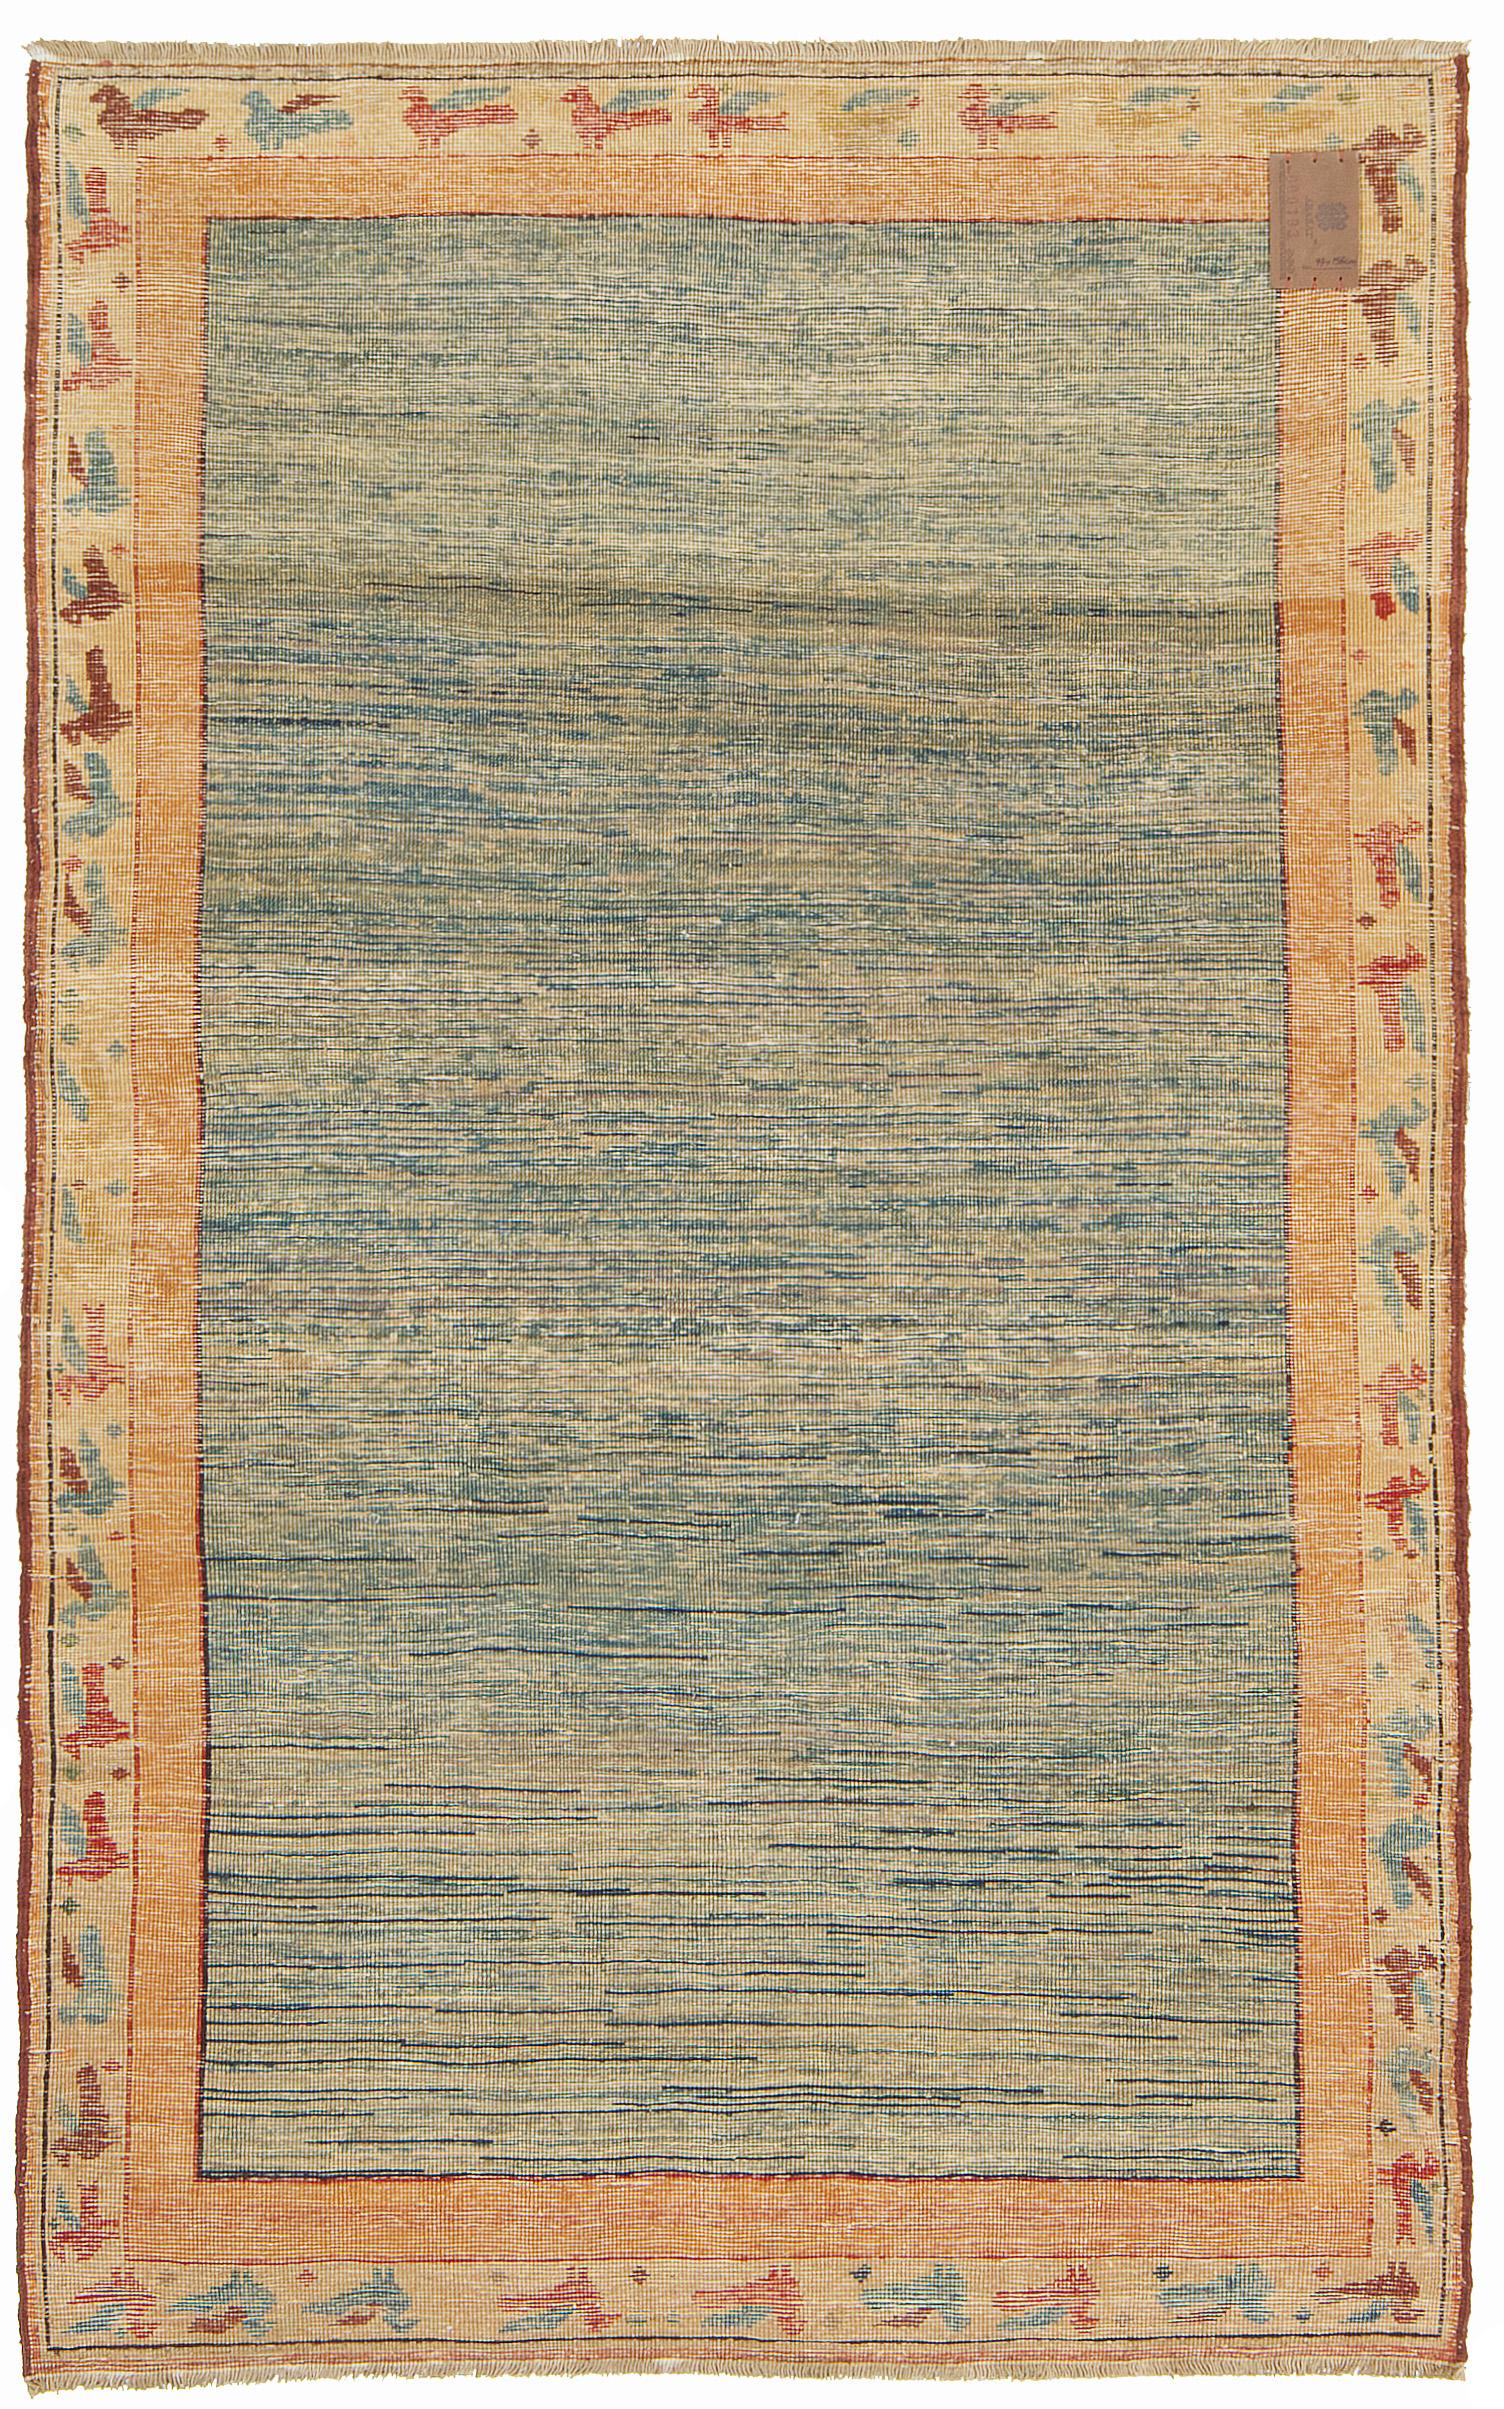 This unique design rug is interpreted by our designers with a mixture of Ararat Rugs’ soft blue tone natural dyed hand-spun yarns. This modern rug is reminiscent of a scene in impressionist river paintings, framed with colorful birds.

Color